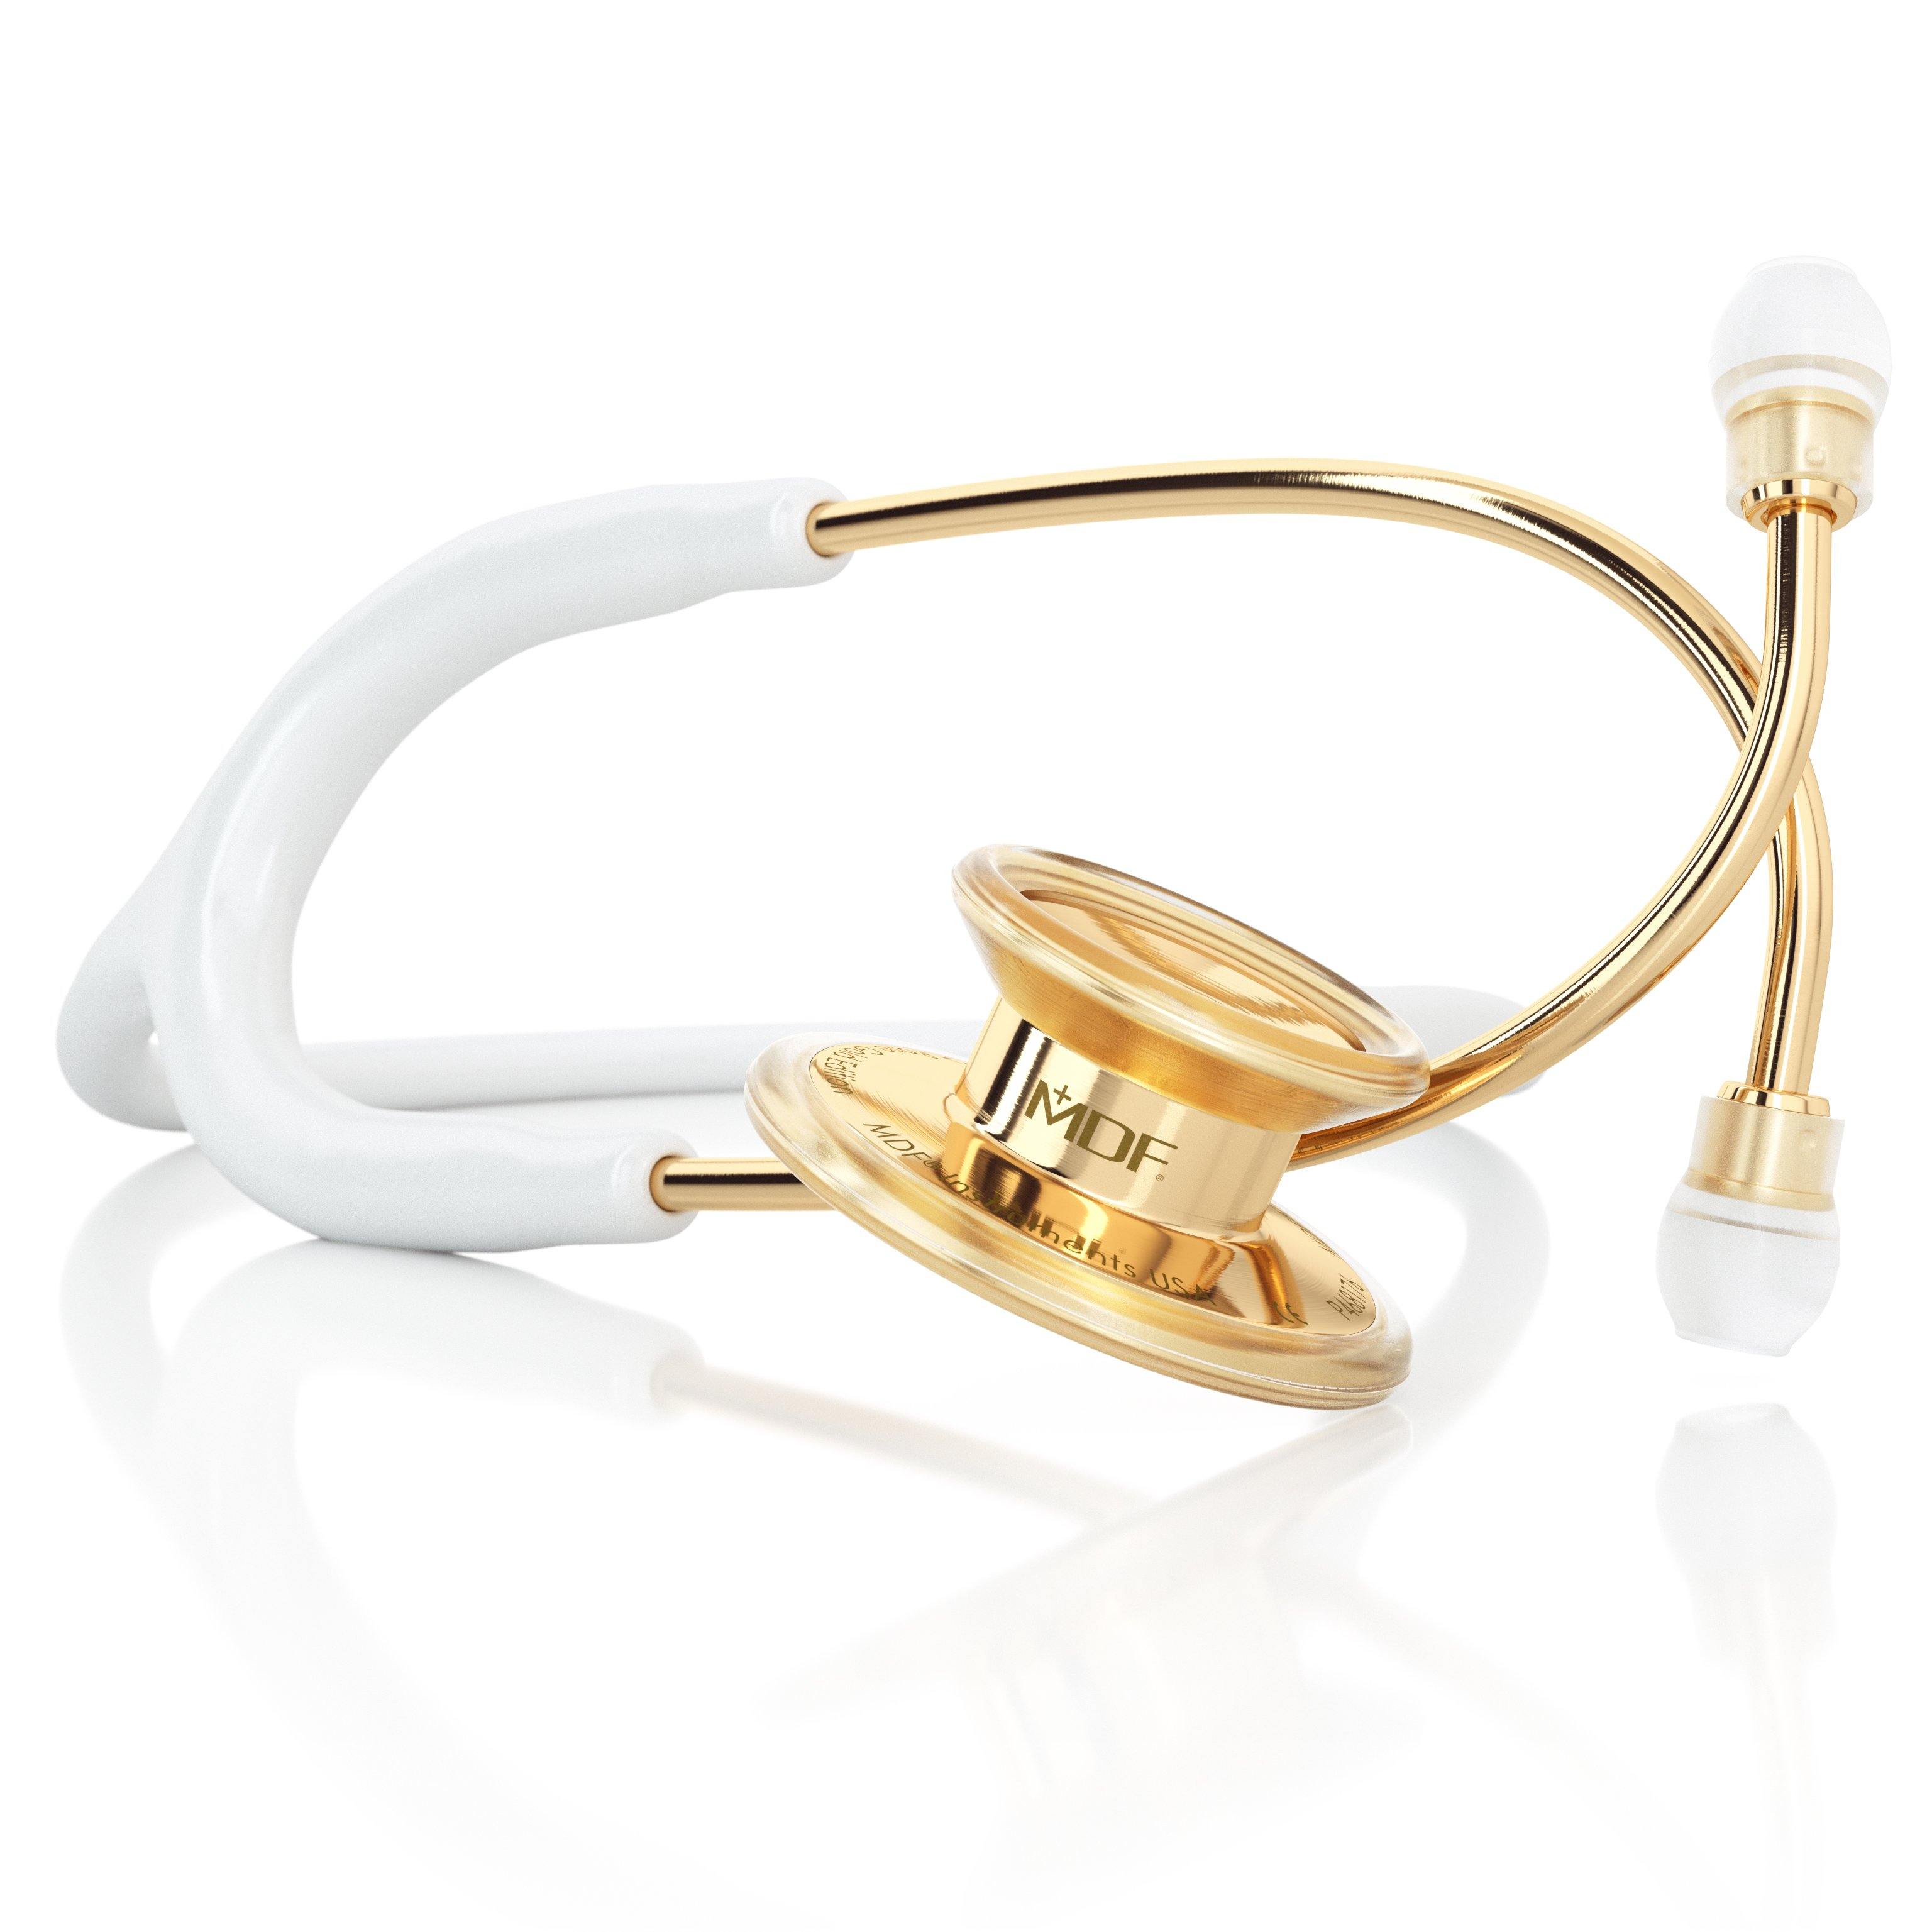 MD One® Adult Stethoscope - White/Gold - MDF Instruments Official Store - No - Stethoscope